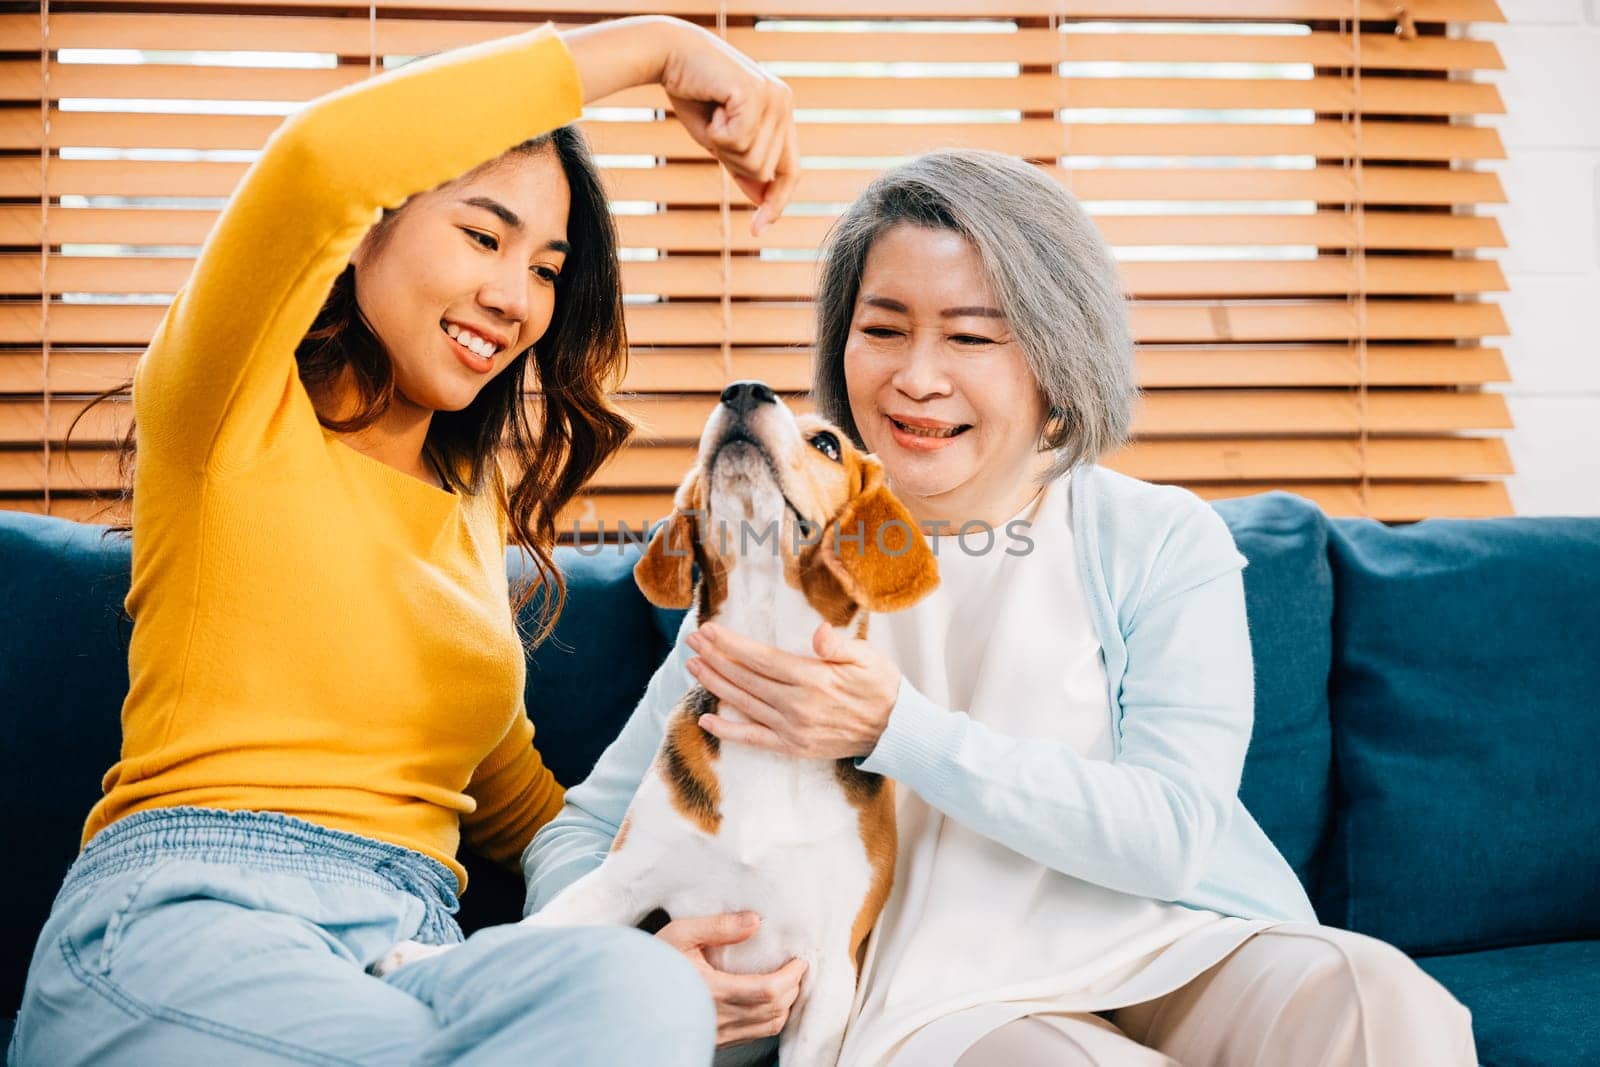 In a cozy home setting, a woman, her mother, and their Beagle dog capture a heartwarming family portrait on the sofa. Their happiness and togetherness shine through. Pet love.